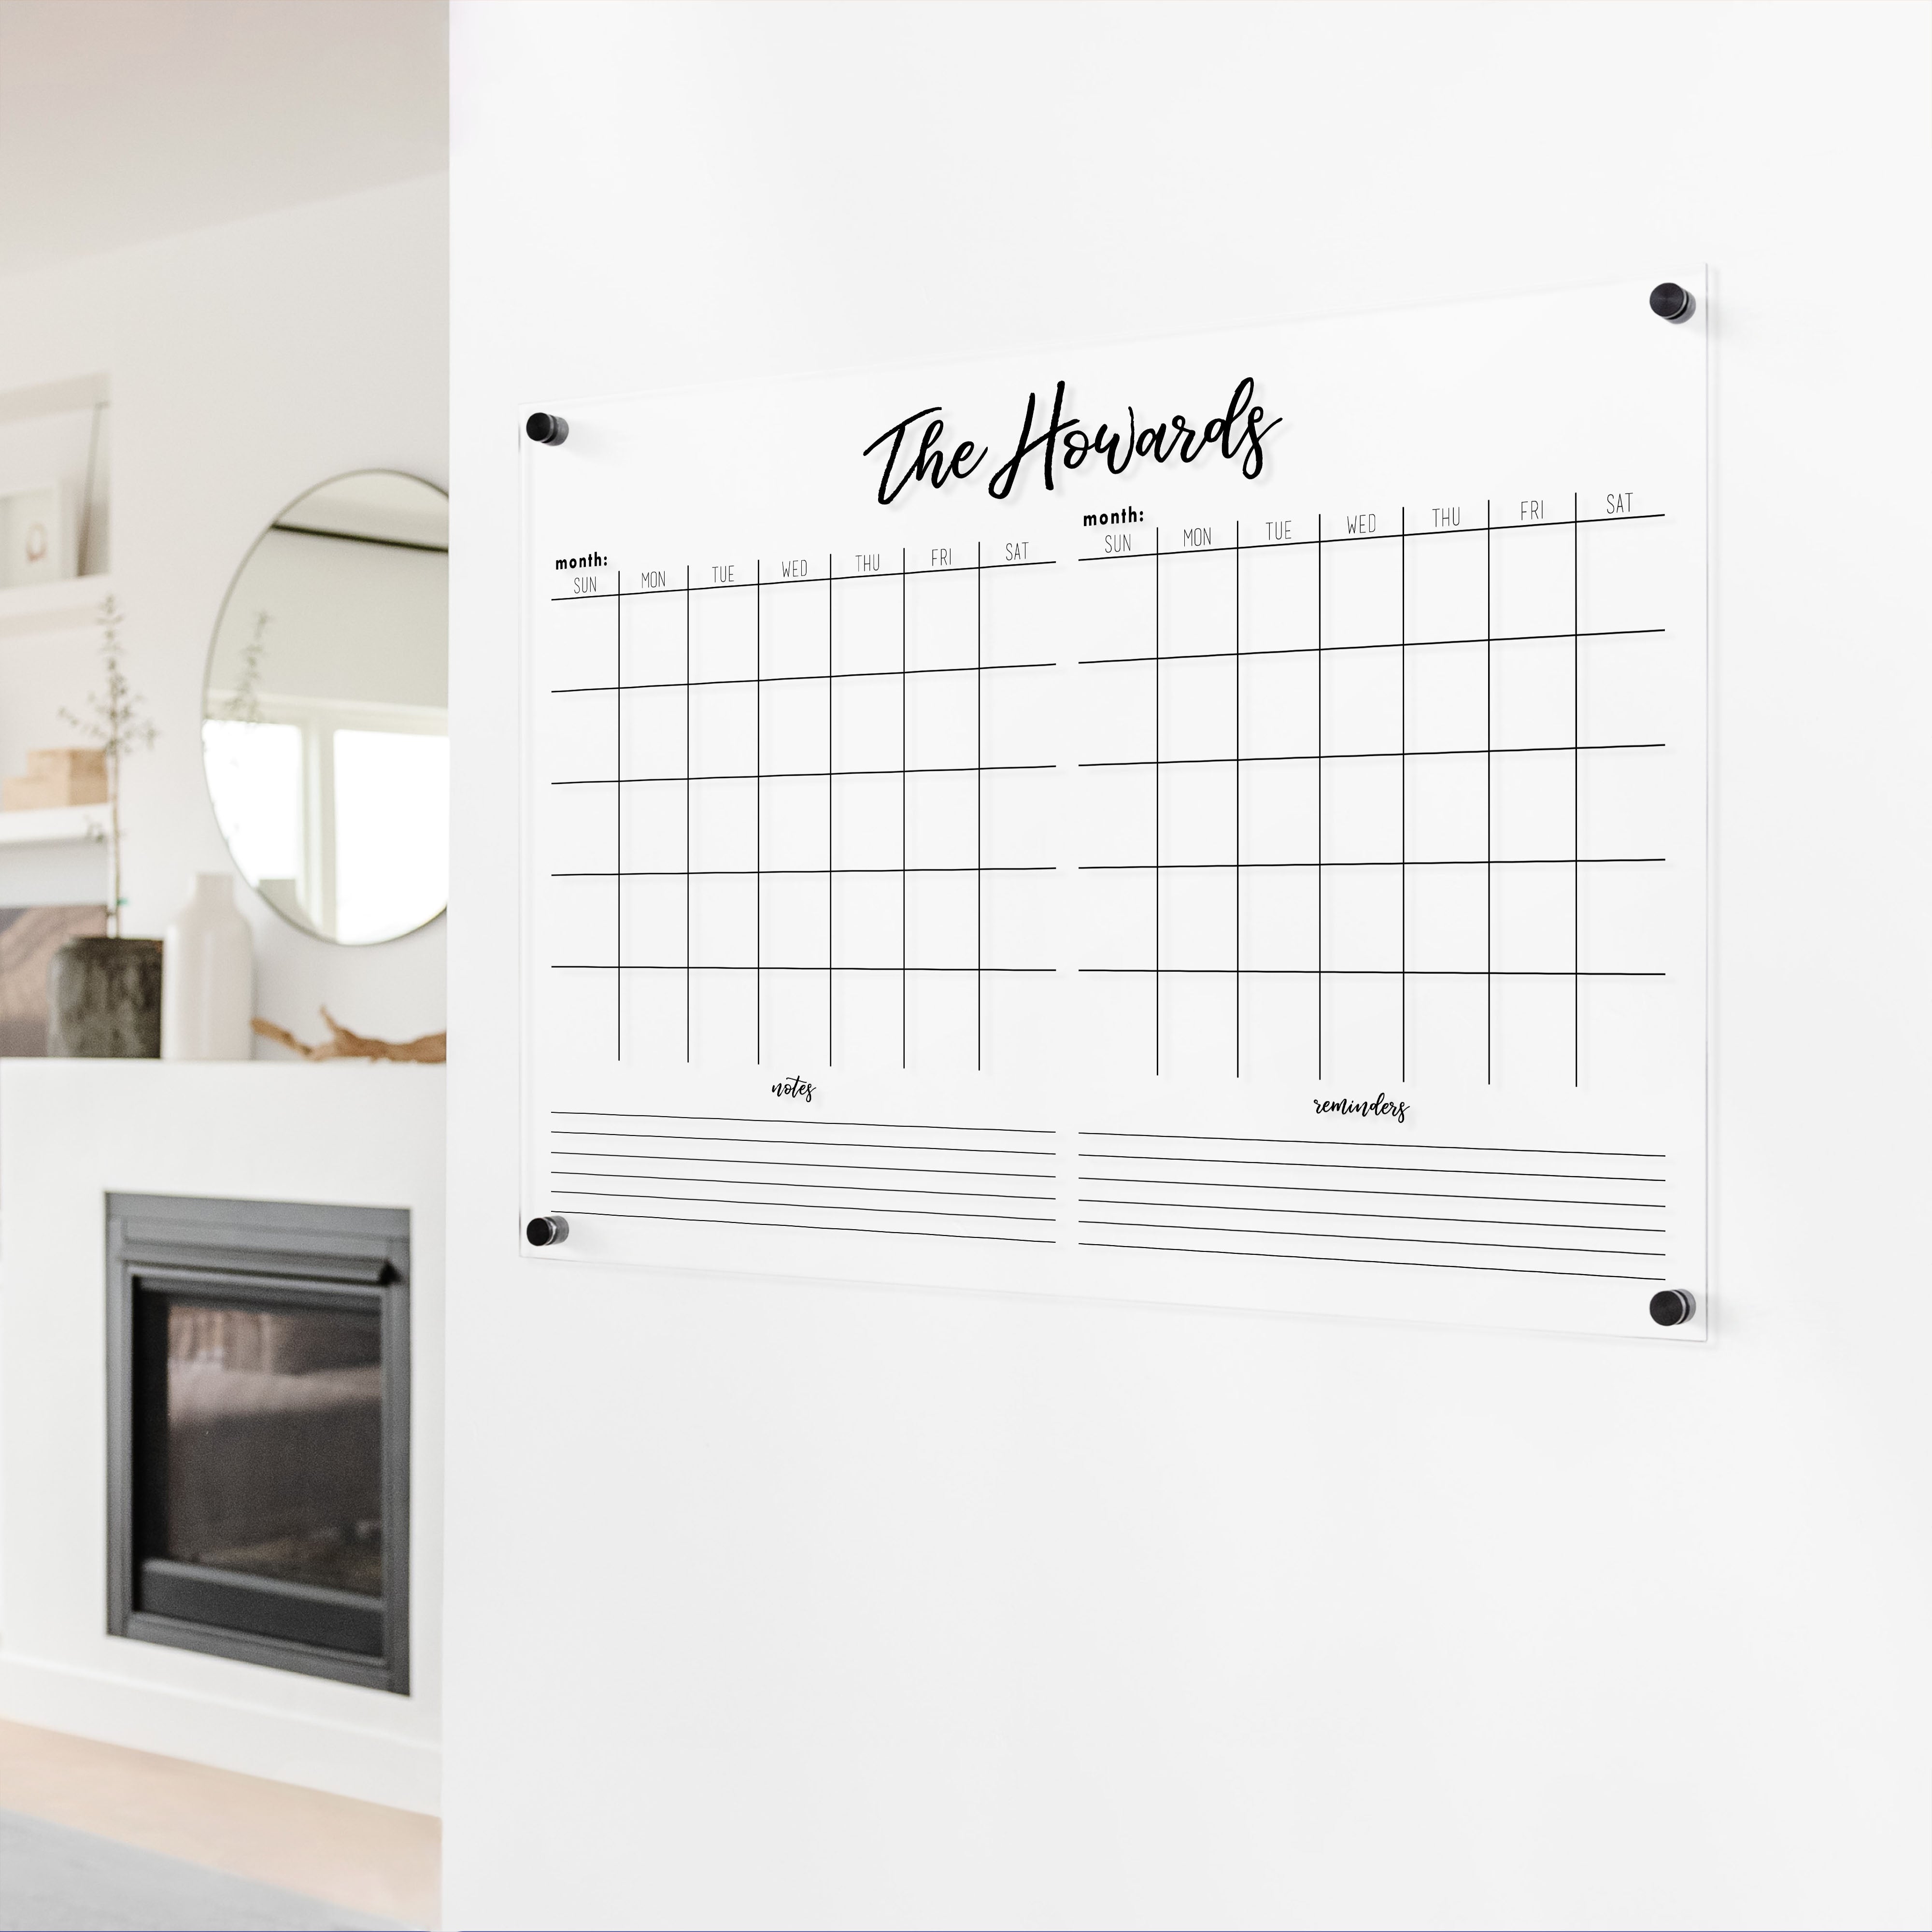 A Dry-erase acrylic calendar with a two month design format hanging on the wall